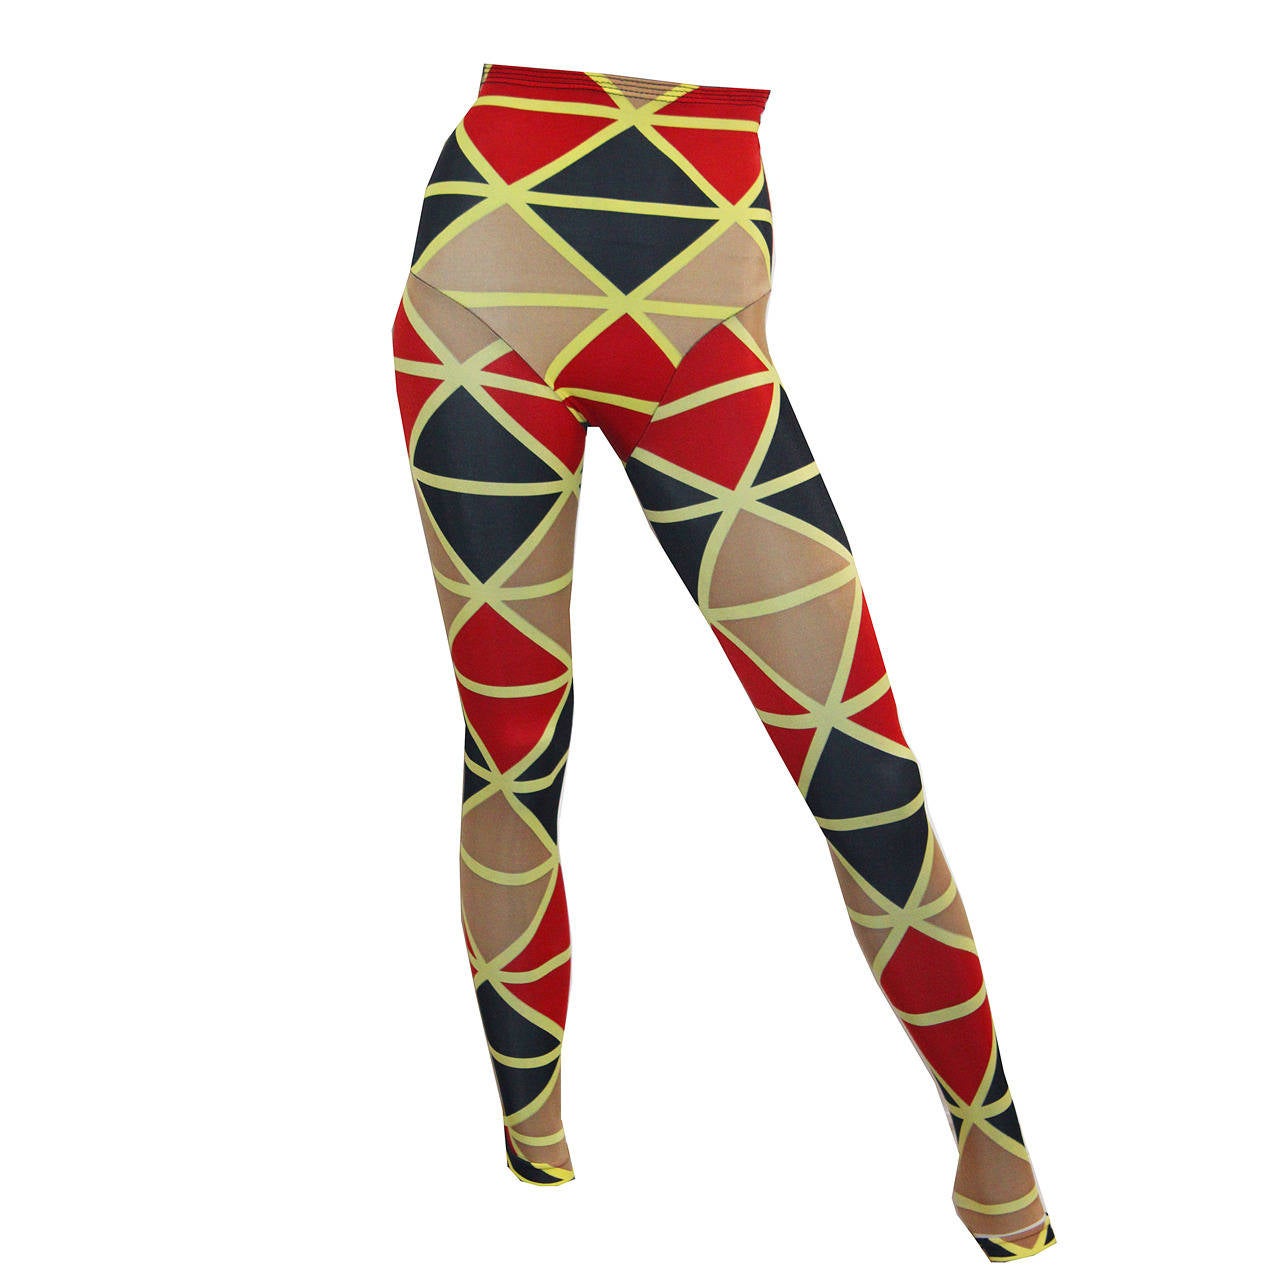 Iconic and rare Vivienne Westwood - Voyage to Cythera 1989, Harlequin Leggings